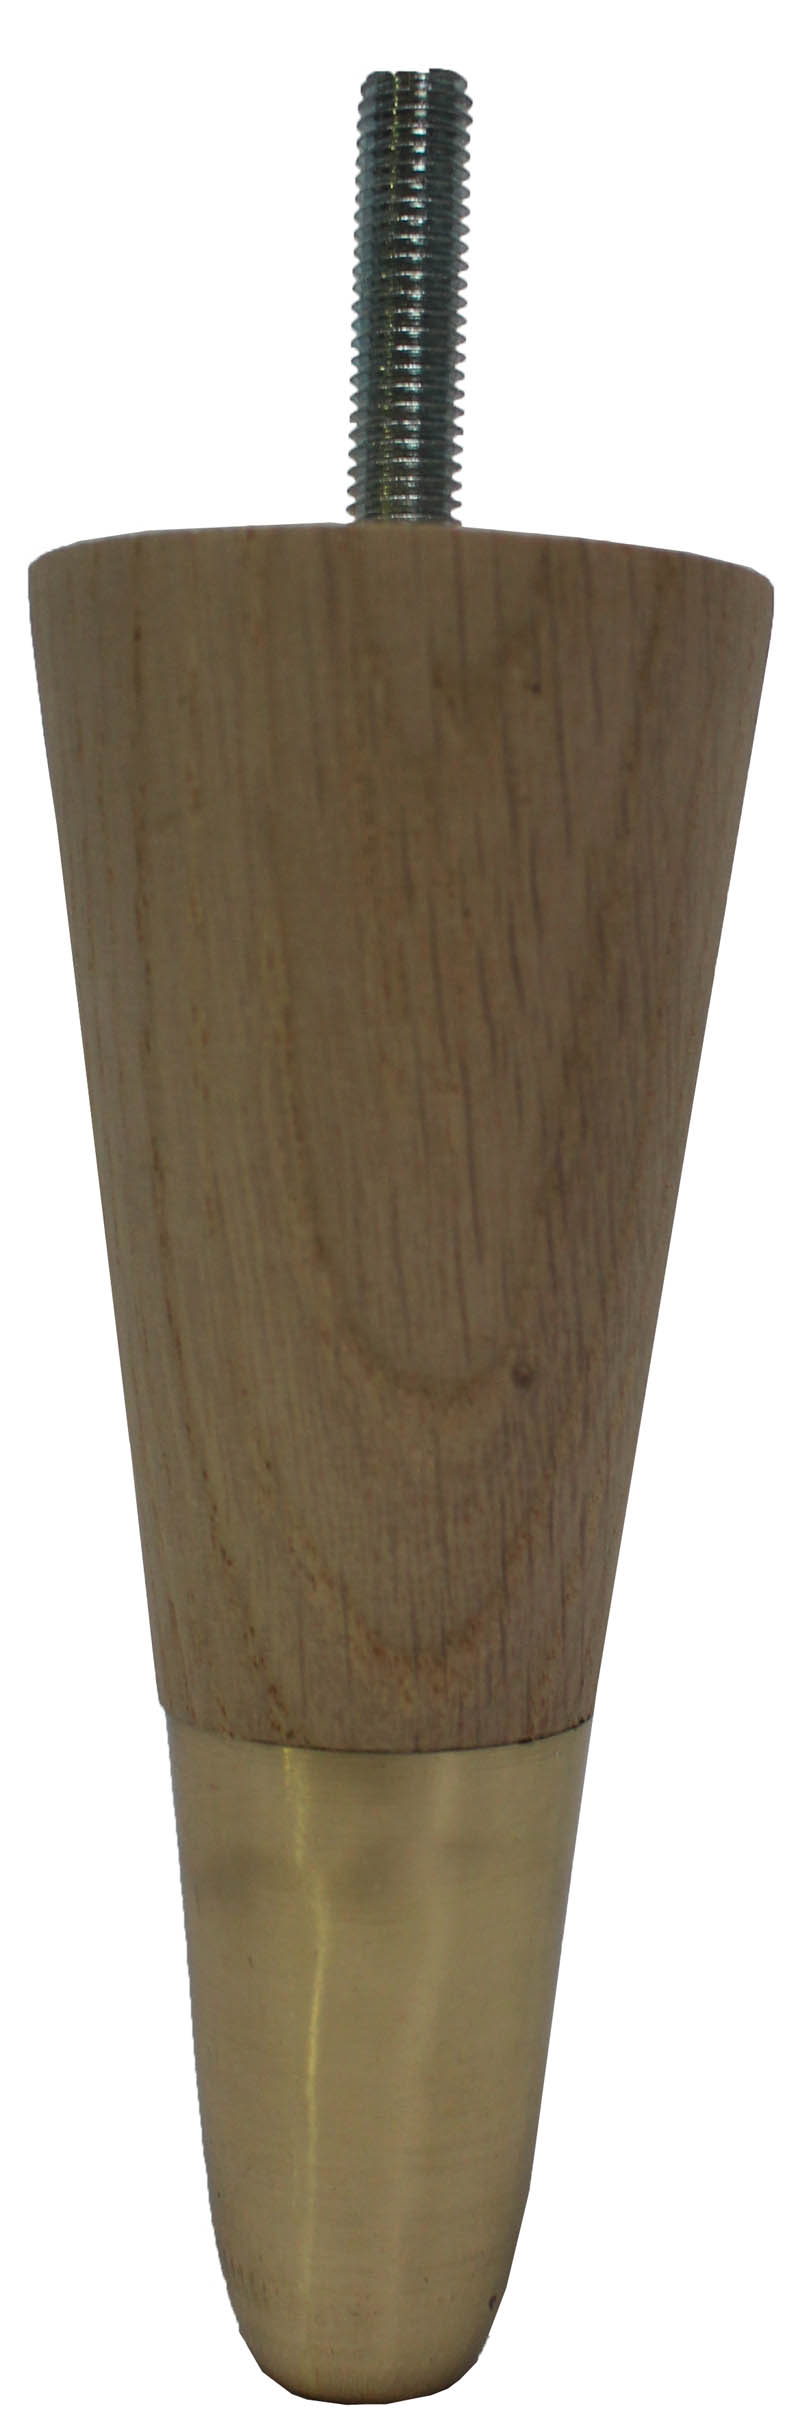 Amaryllis Solid Oak Furniture Legs with Slipper Cups